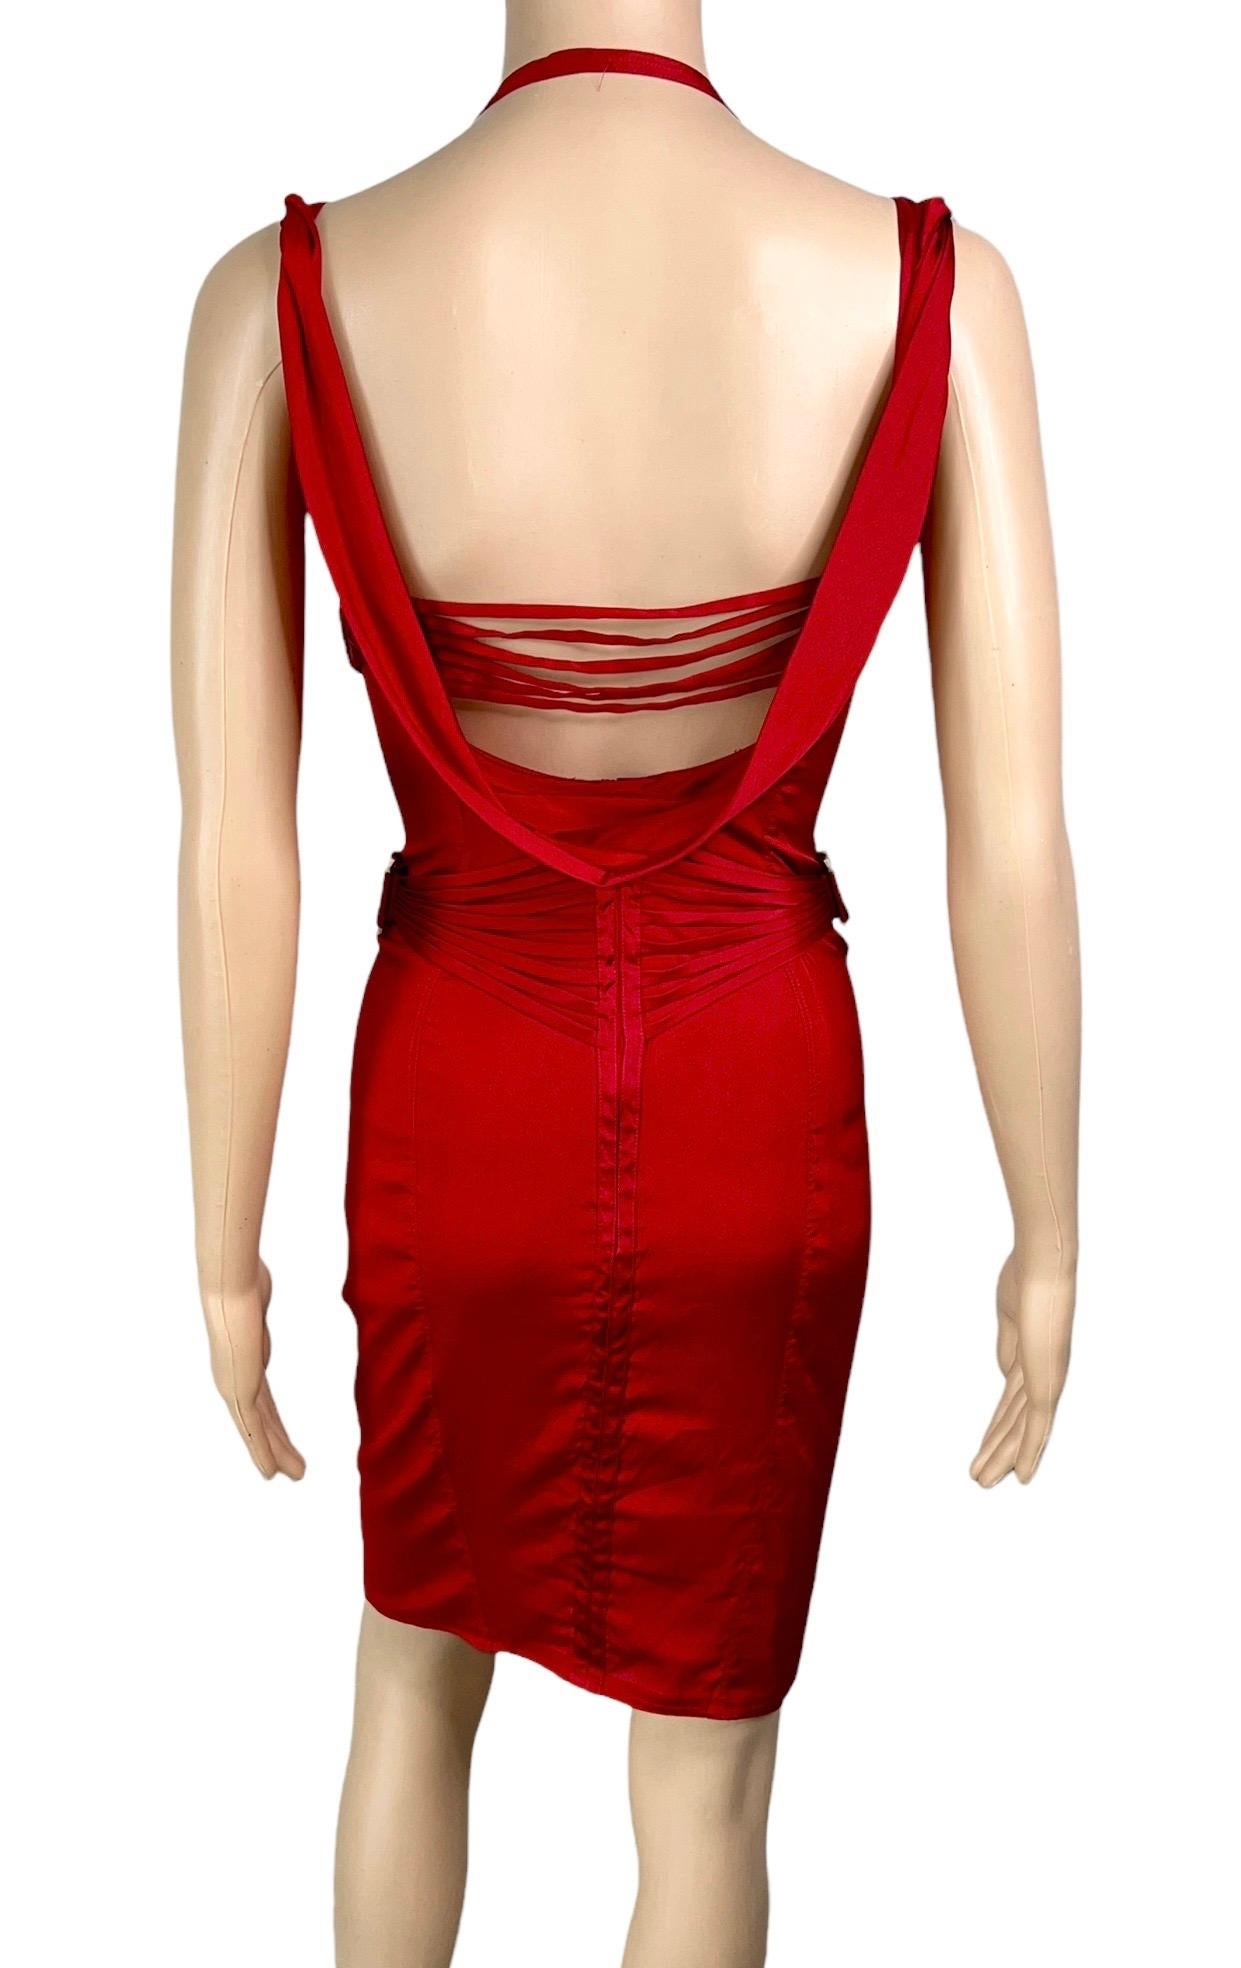 tom ford red dress